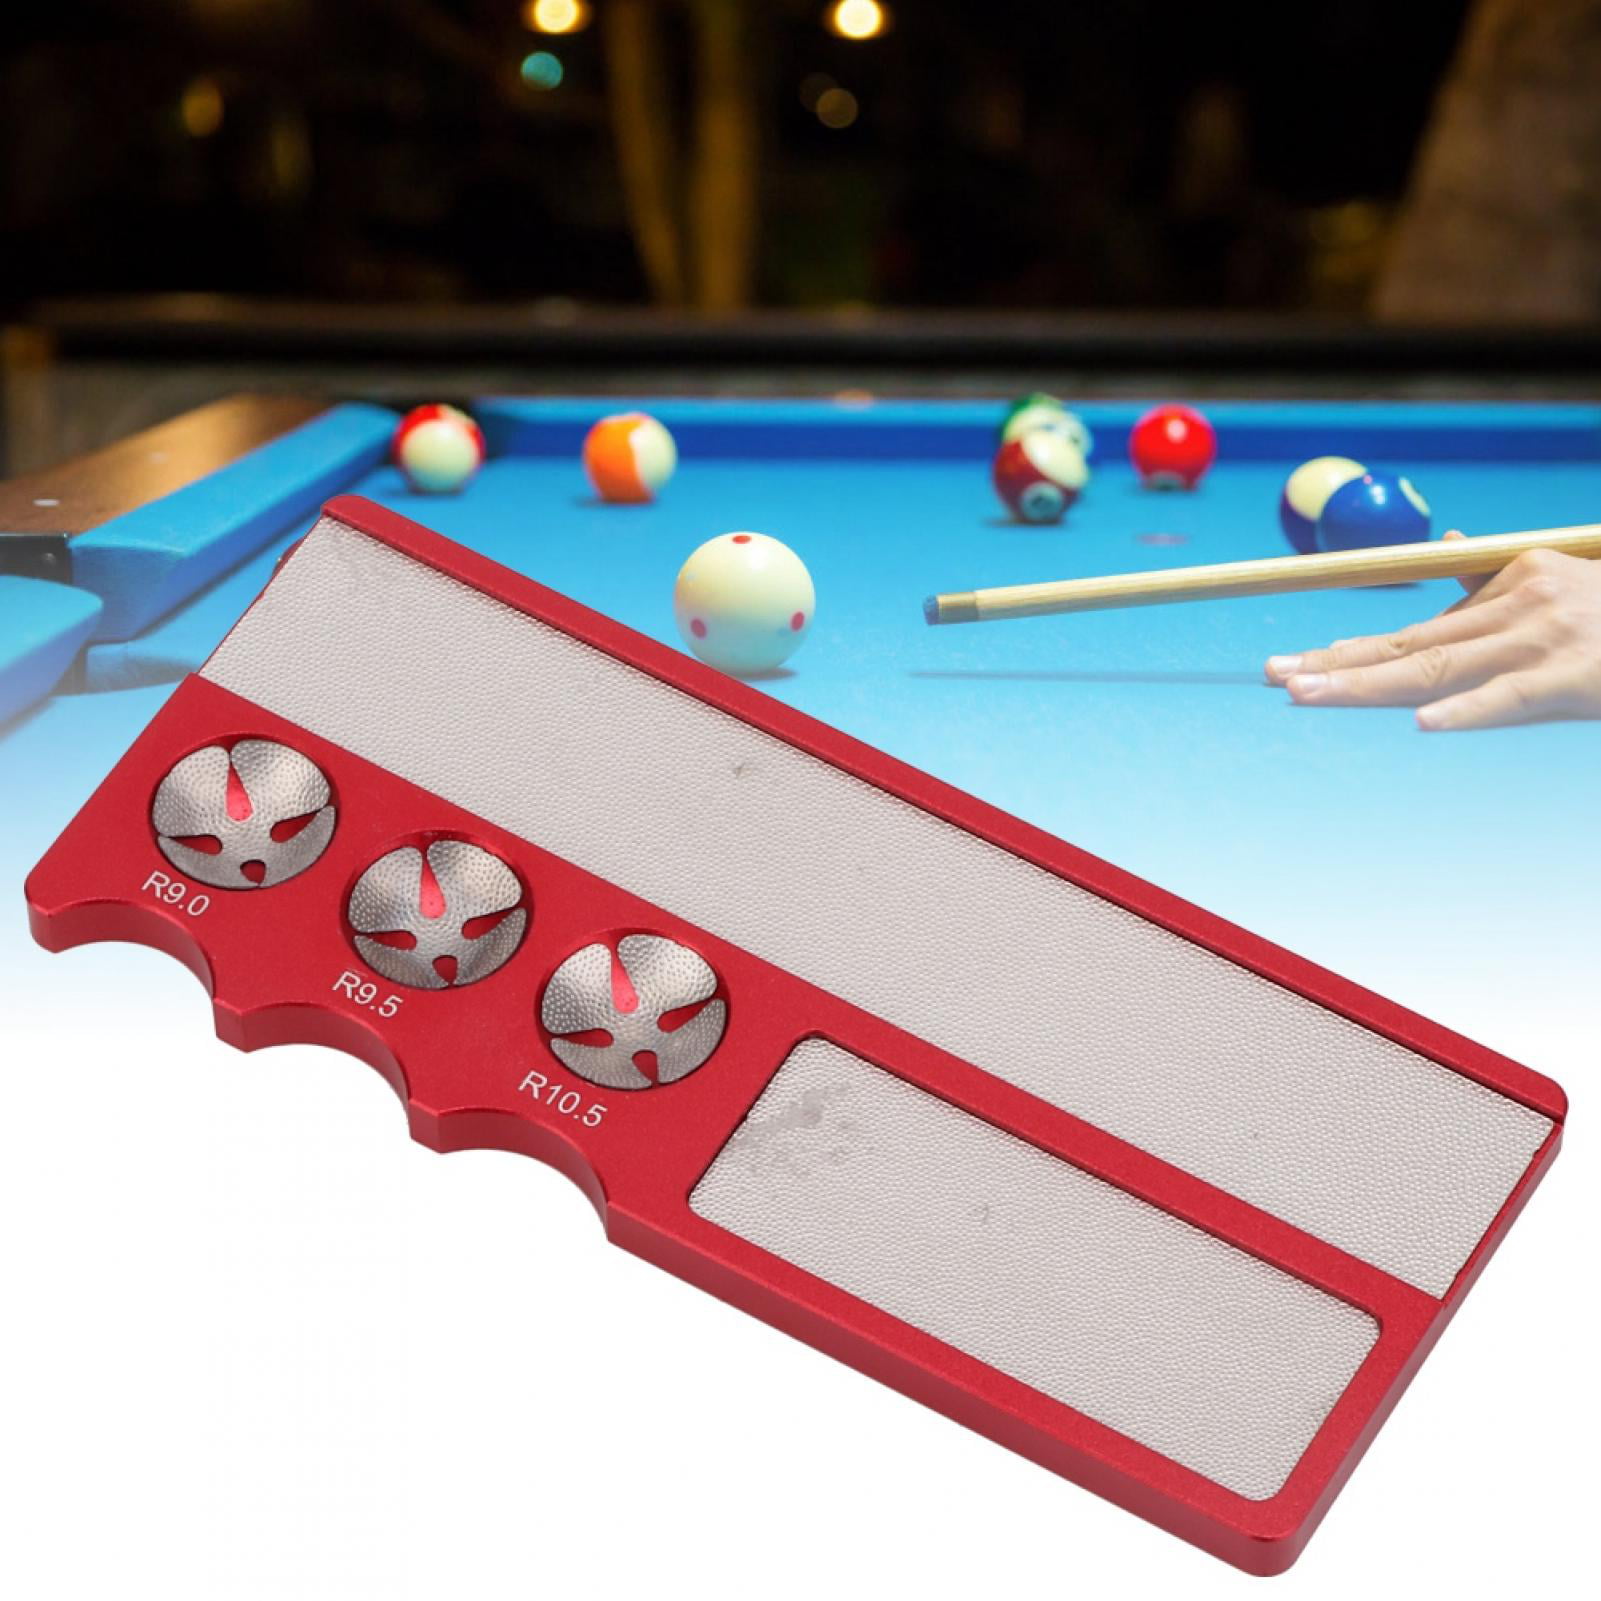 Snooker & Pool Accessory Set/Pack Cue Tips-Chalk-Towel File-Holder-Glue-Ext. 